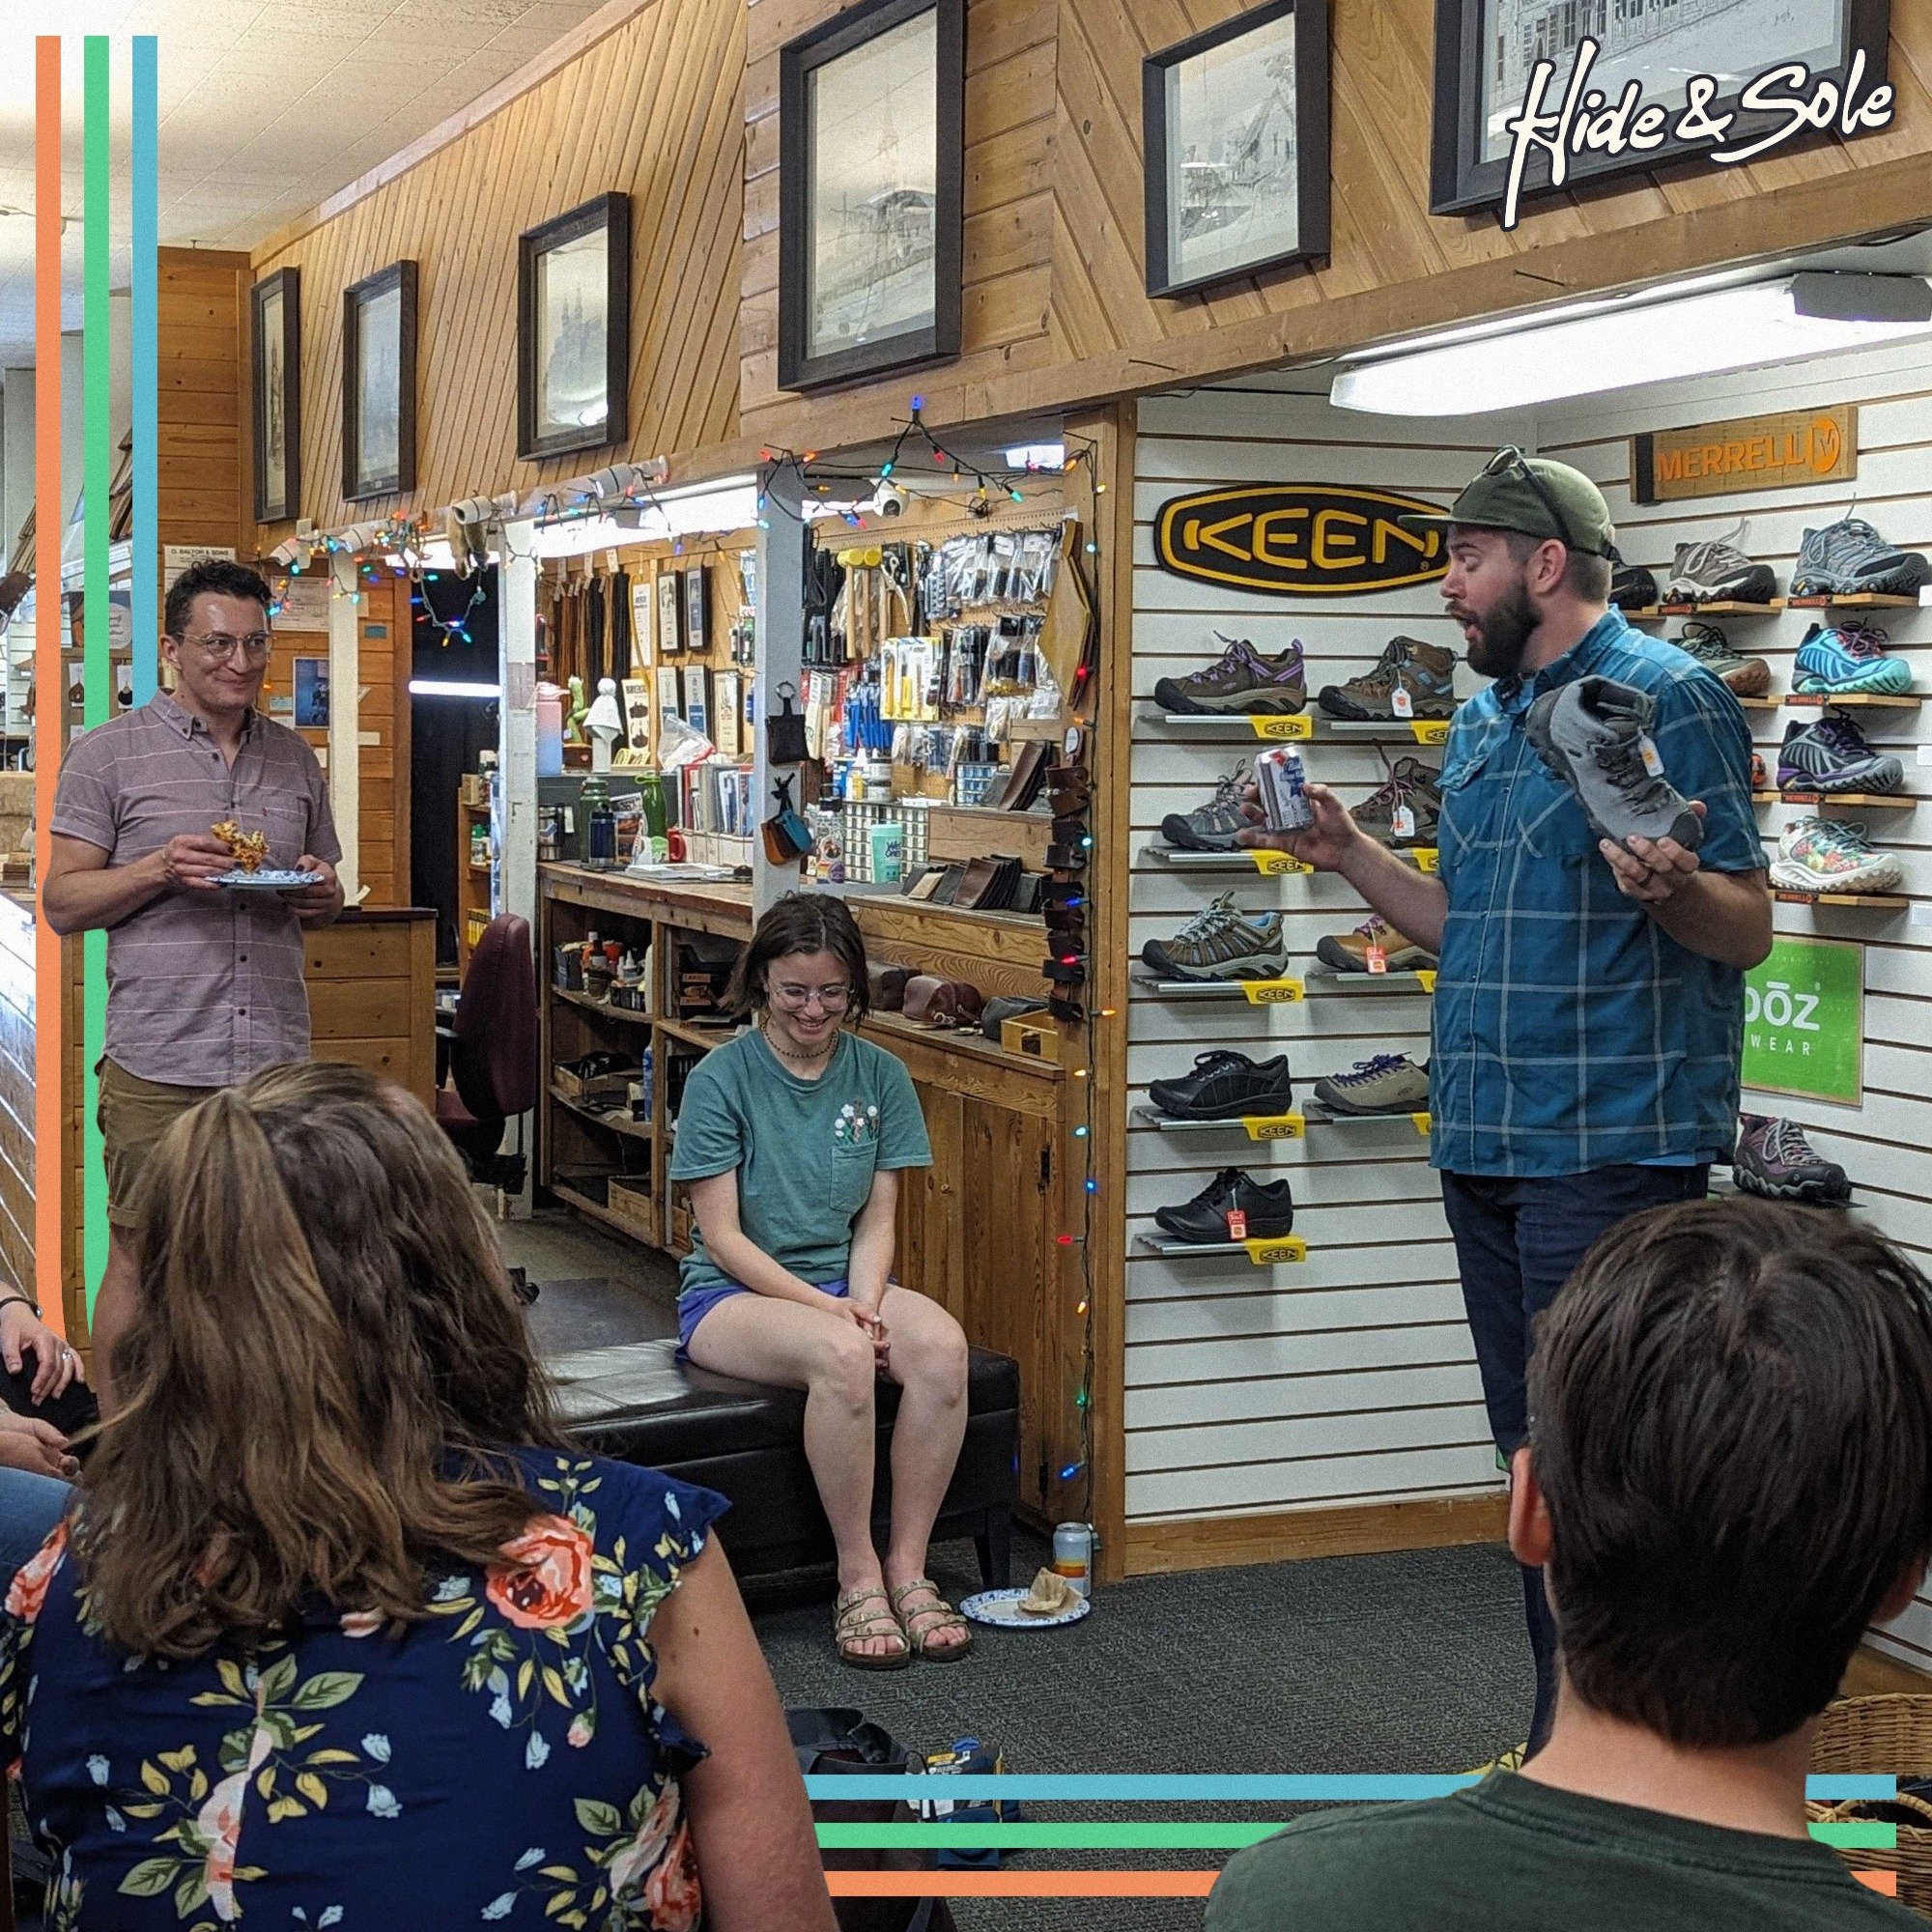 Thank you so much to our @obozfootwear rep for the fantastic visit we had earlier this week.

We were very grateful to get the chance to sit down and chat about new and returning styles, exciting new product lines, and how Oboz designs their footwear